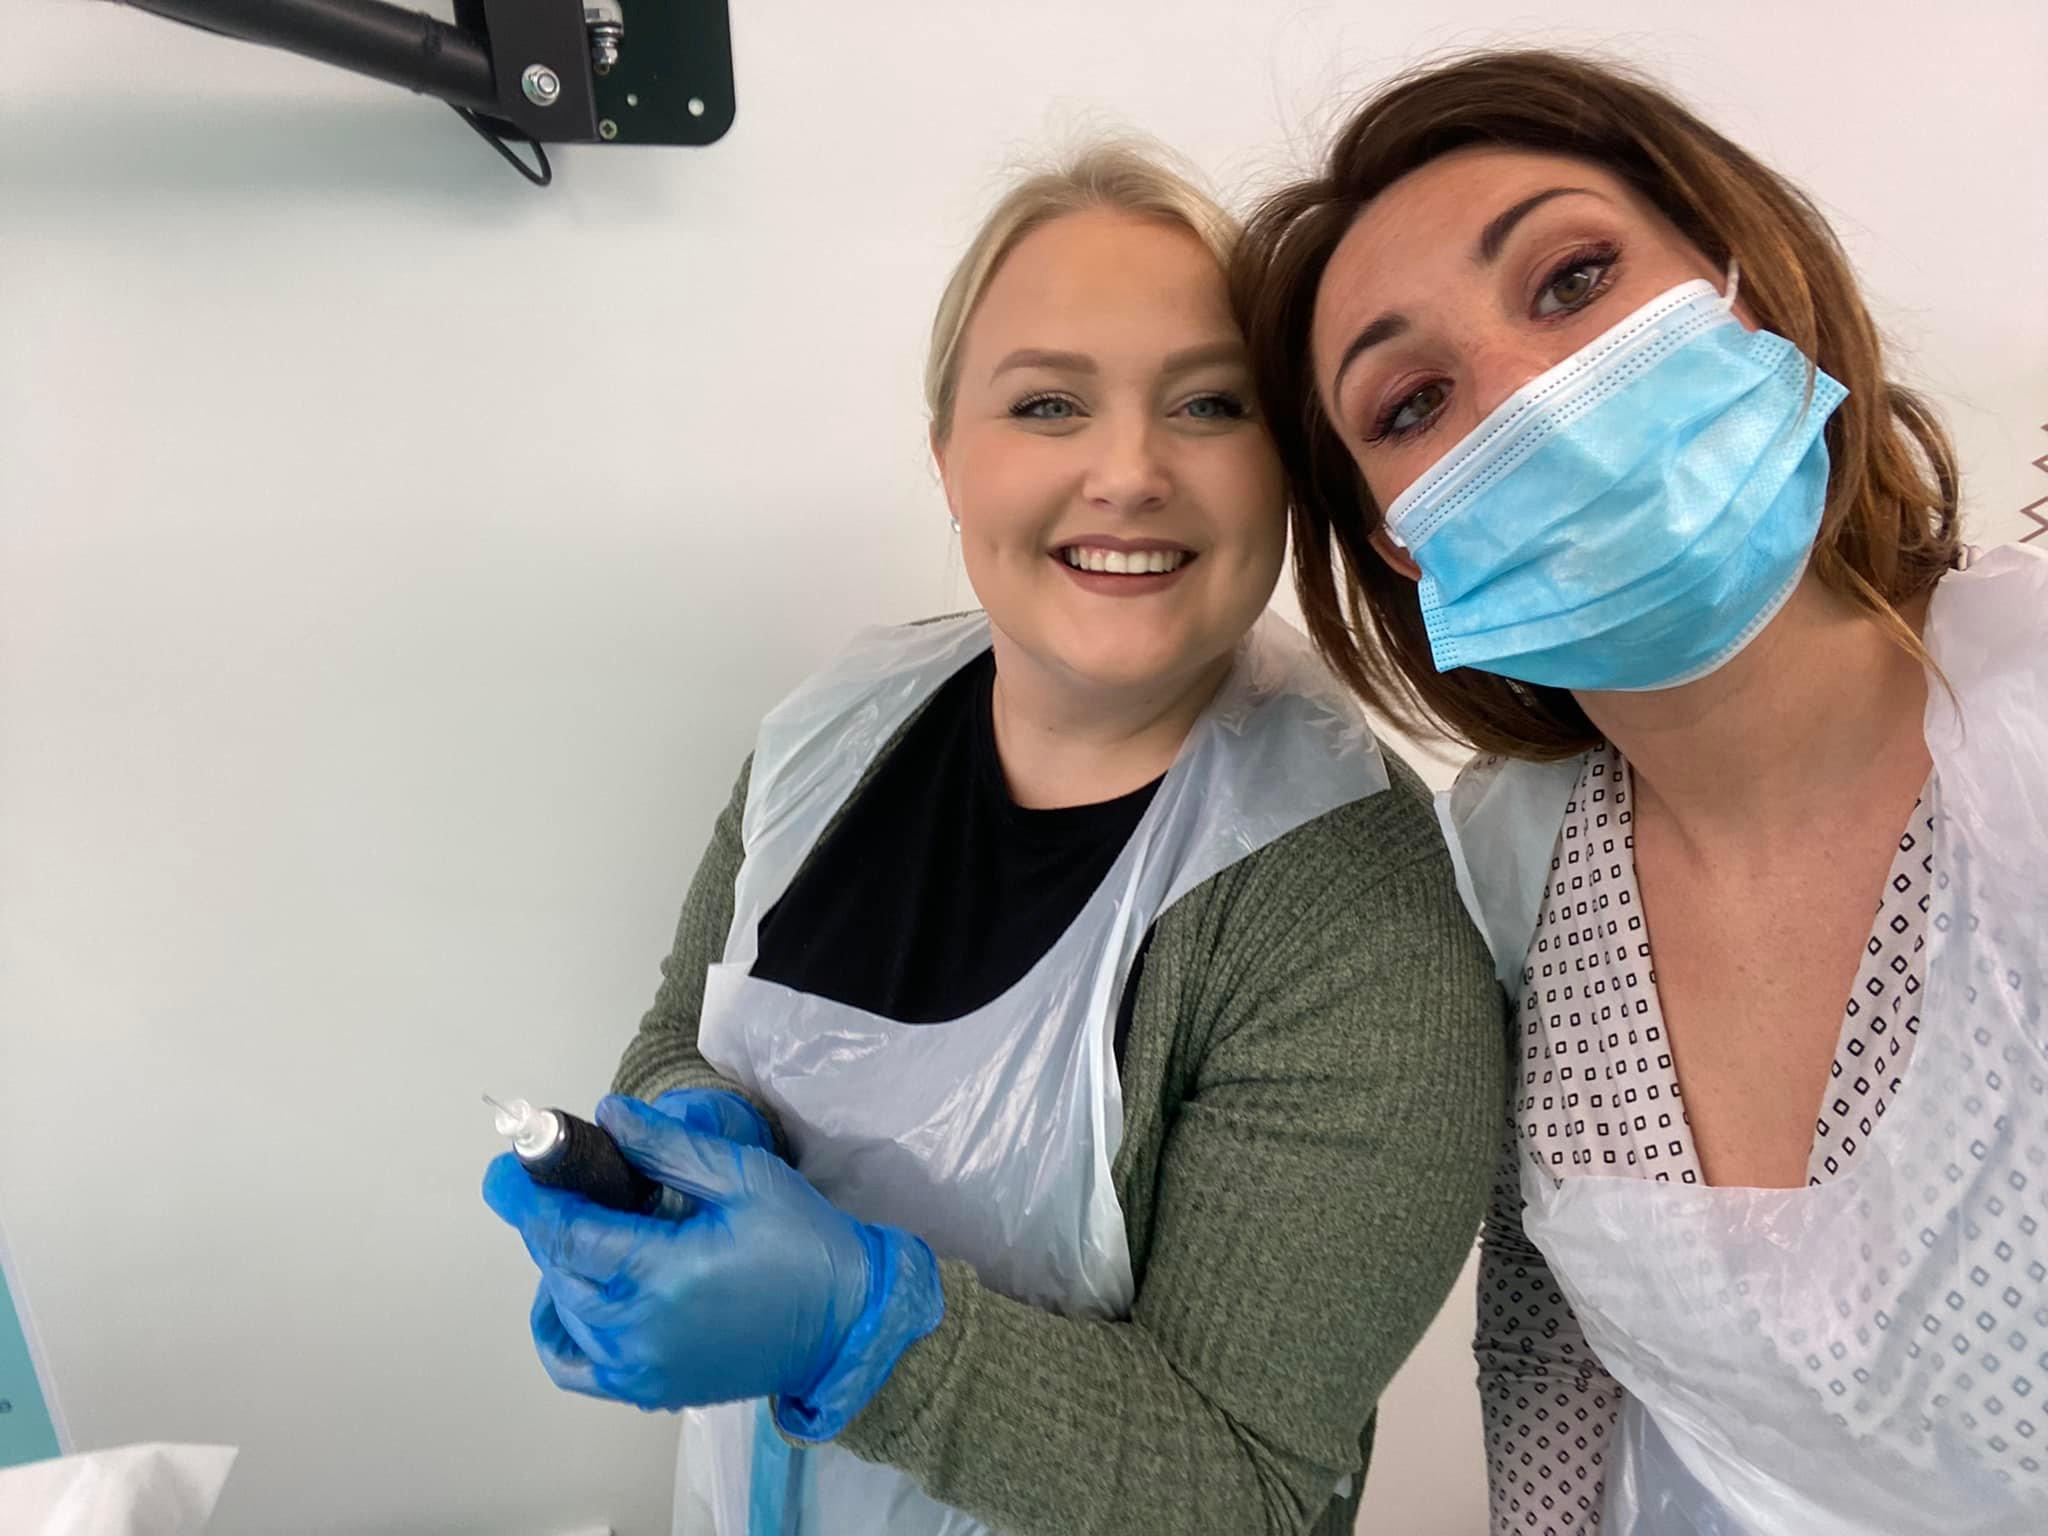 Zoe Lee with Katy Jobbins at the Permanent Makeup Training Academy